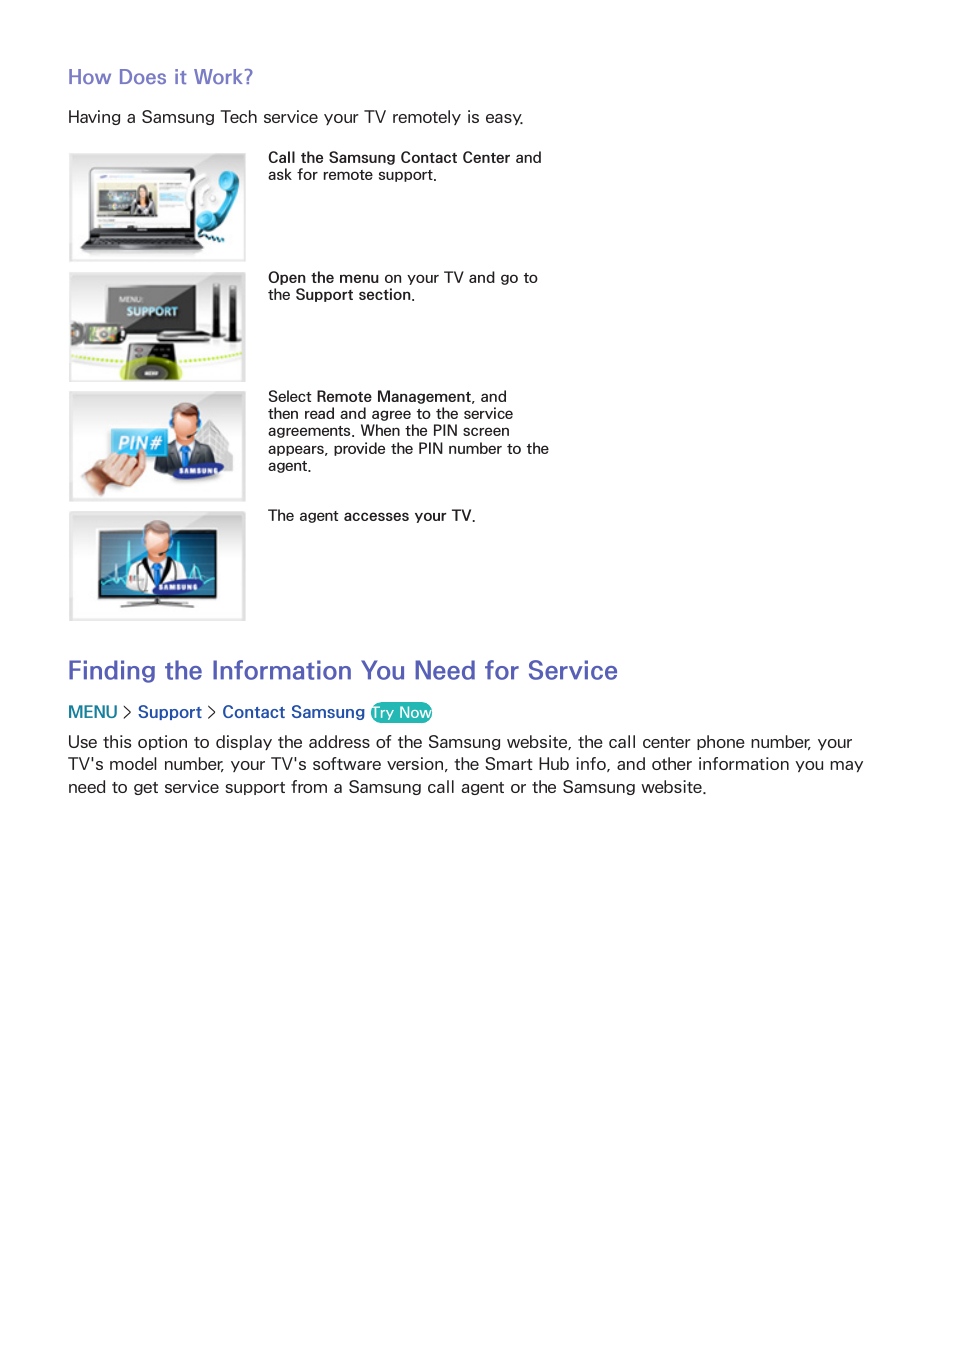 111 finding the information you need for service, Finding the